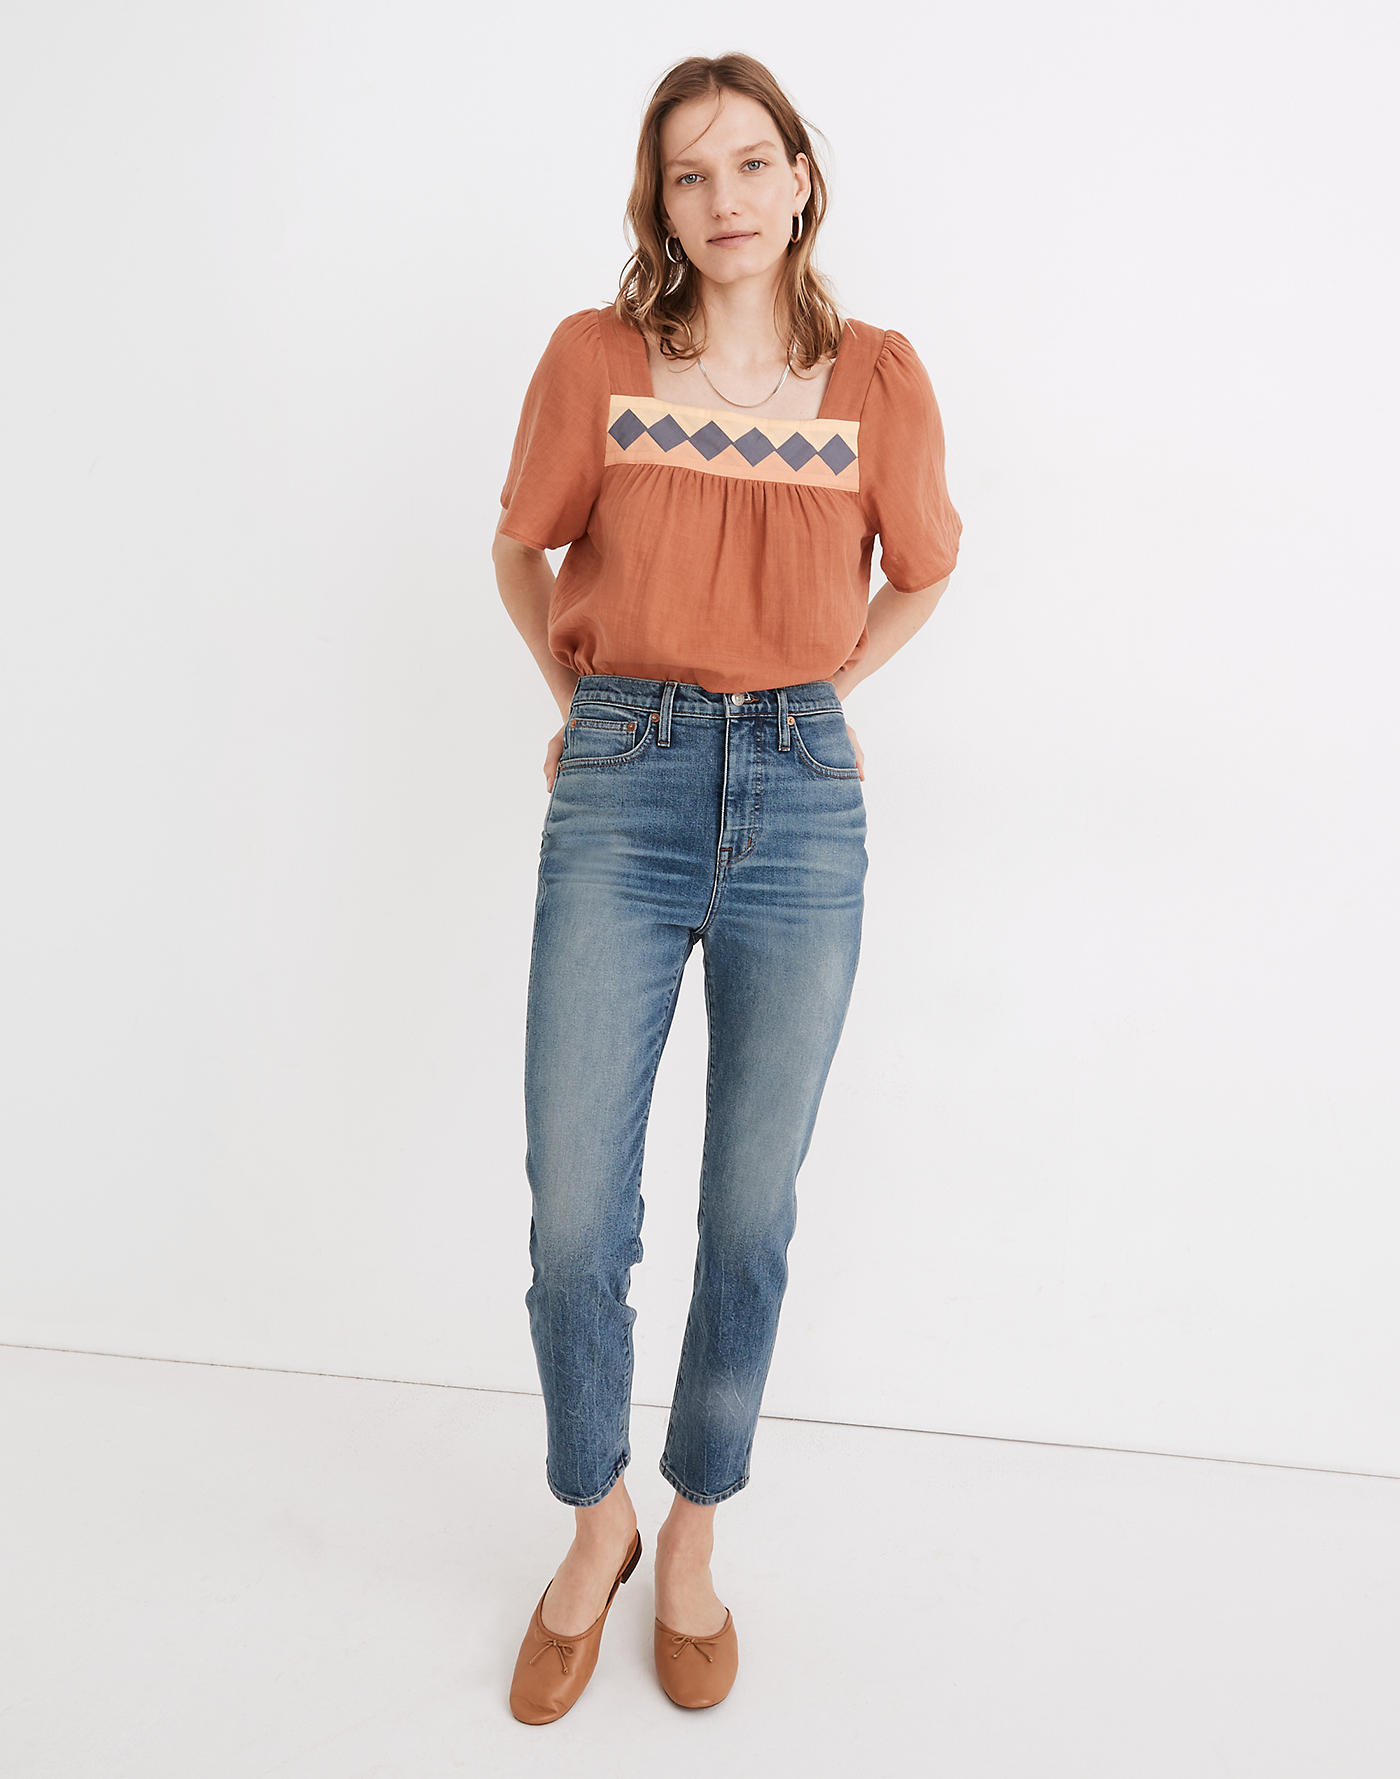 Madewell Rivet & Thread High-Rise Stovepipe Jeans in Keyes Wash